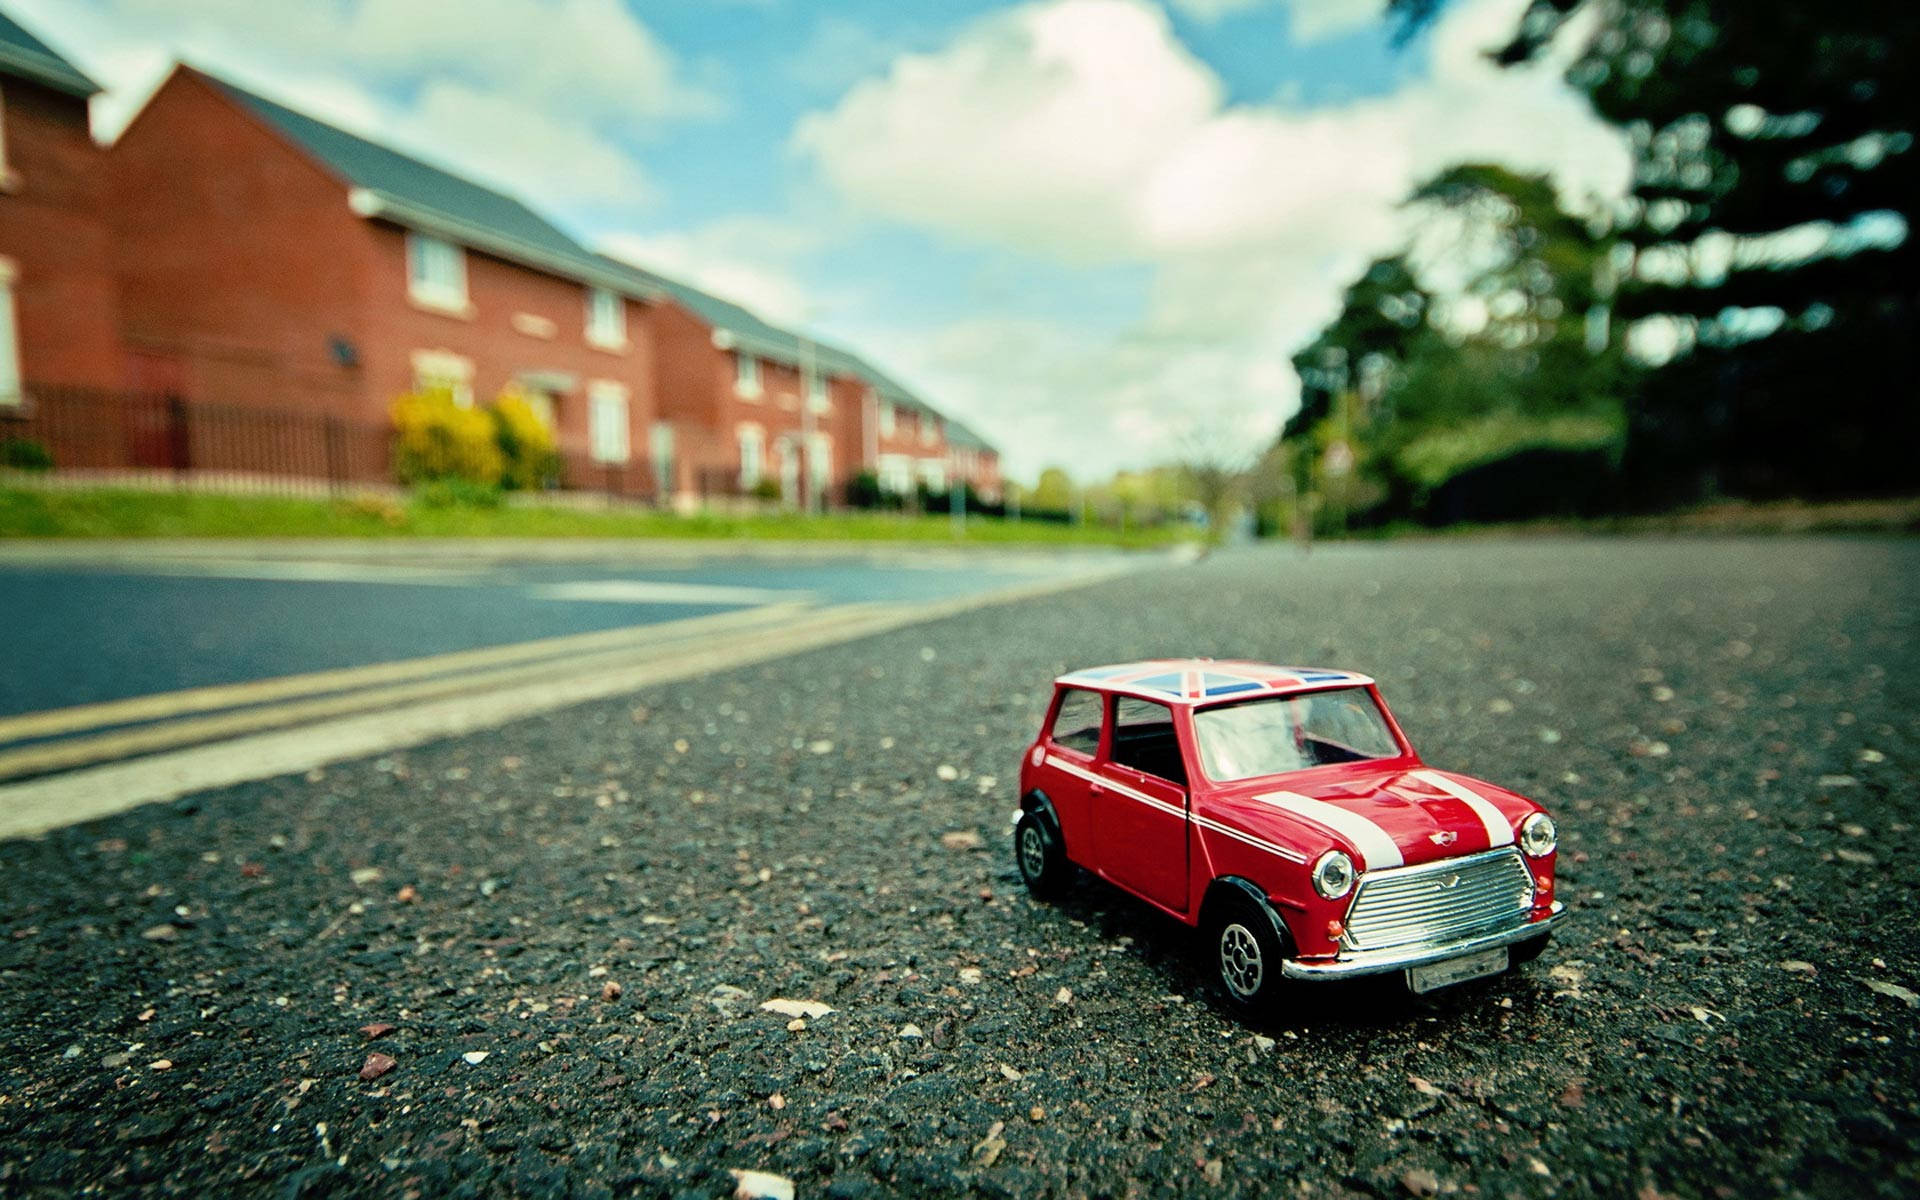 Bright Red Mini Cooper - Add A Little Spice To Your Ride Background